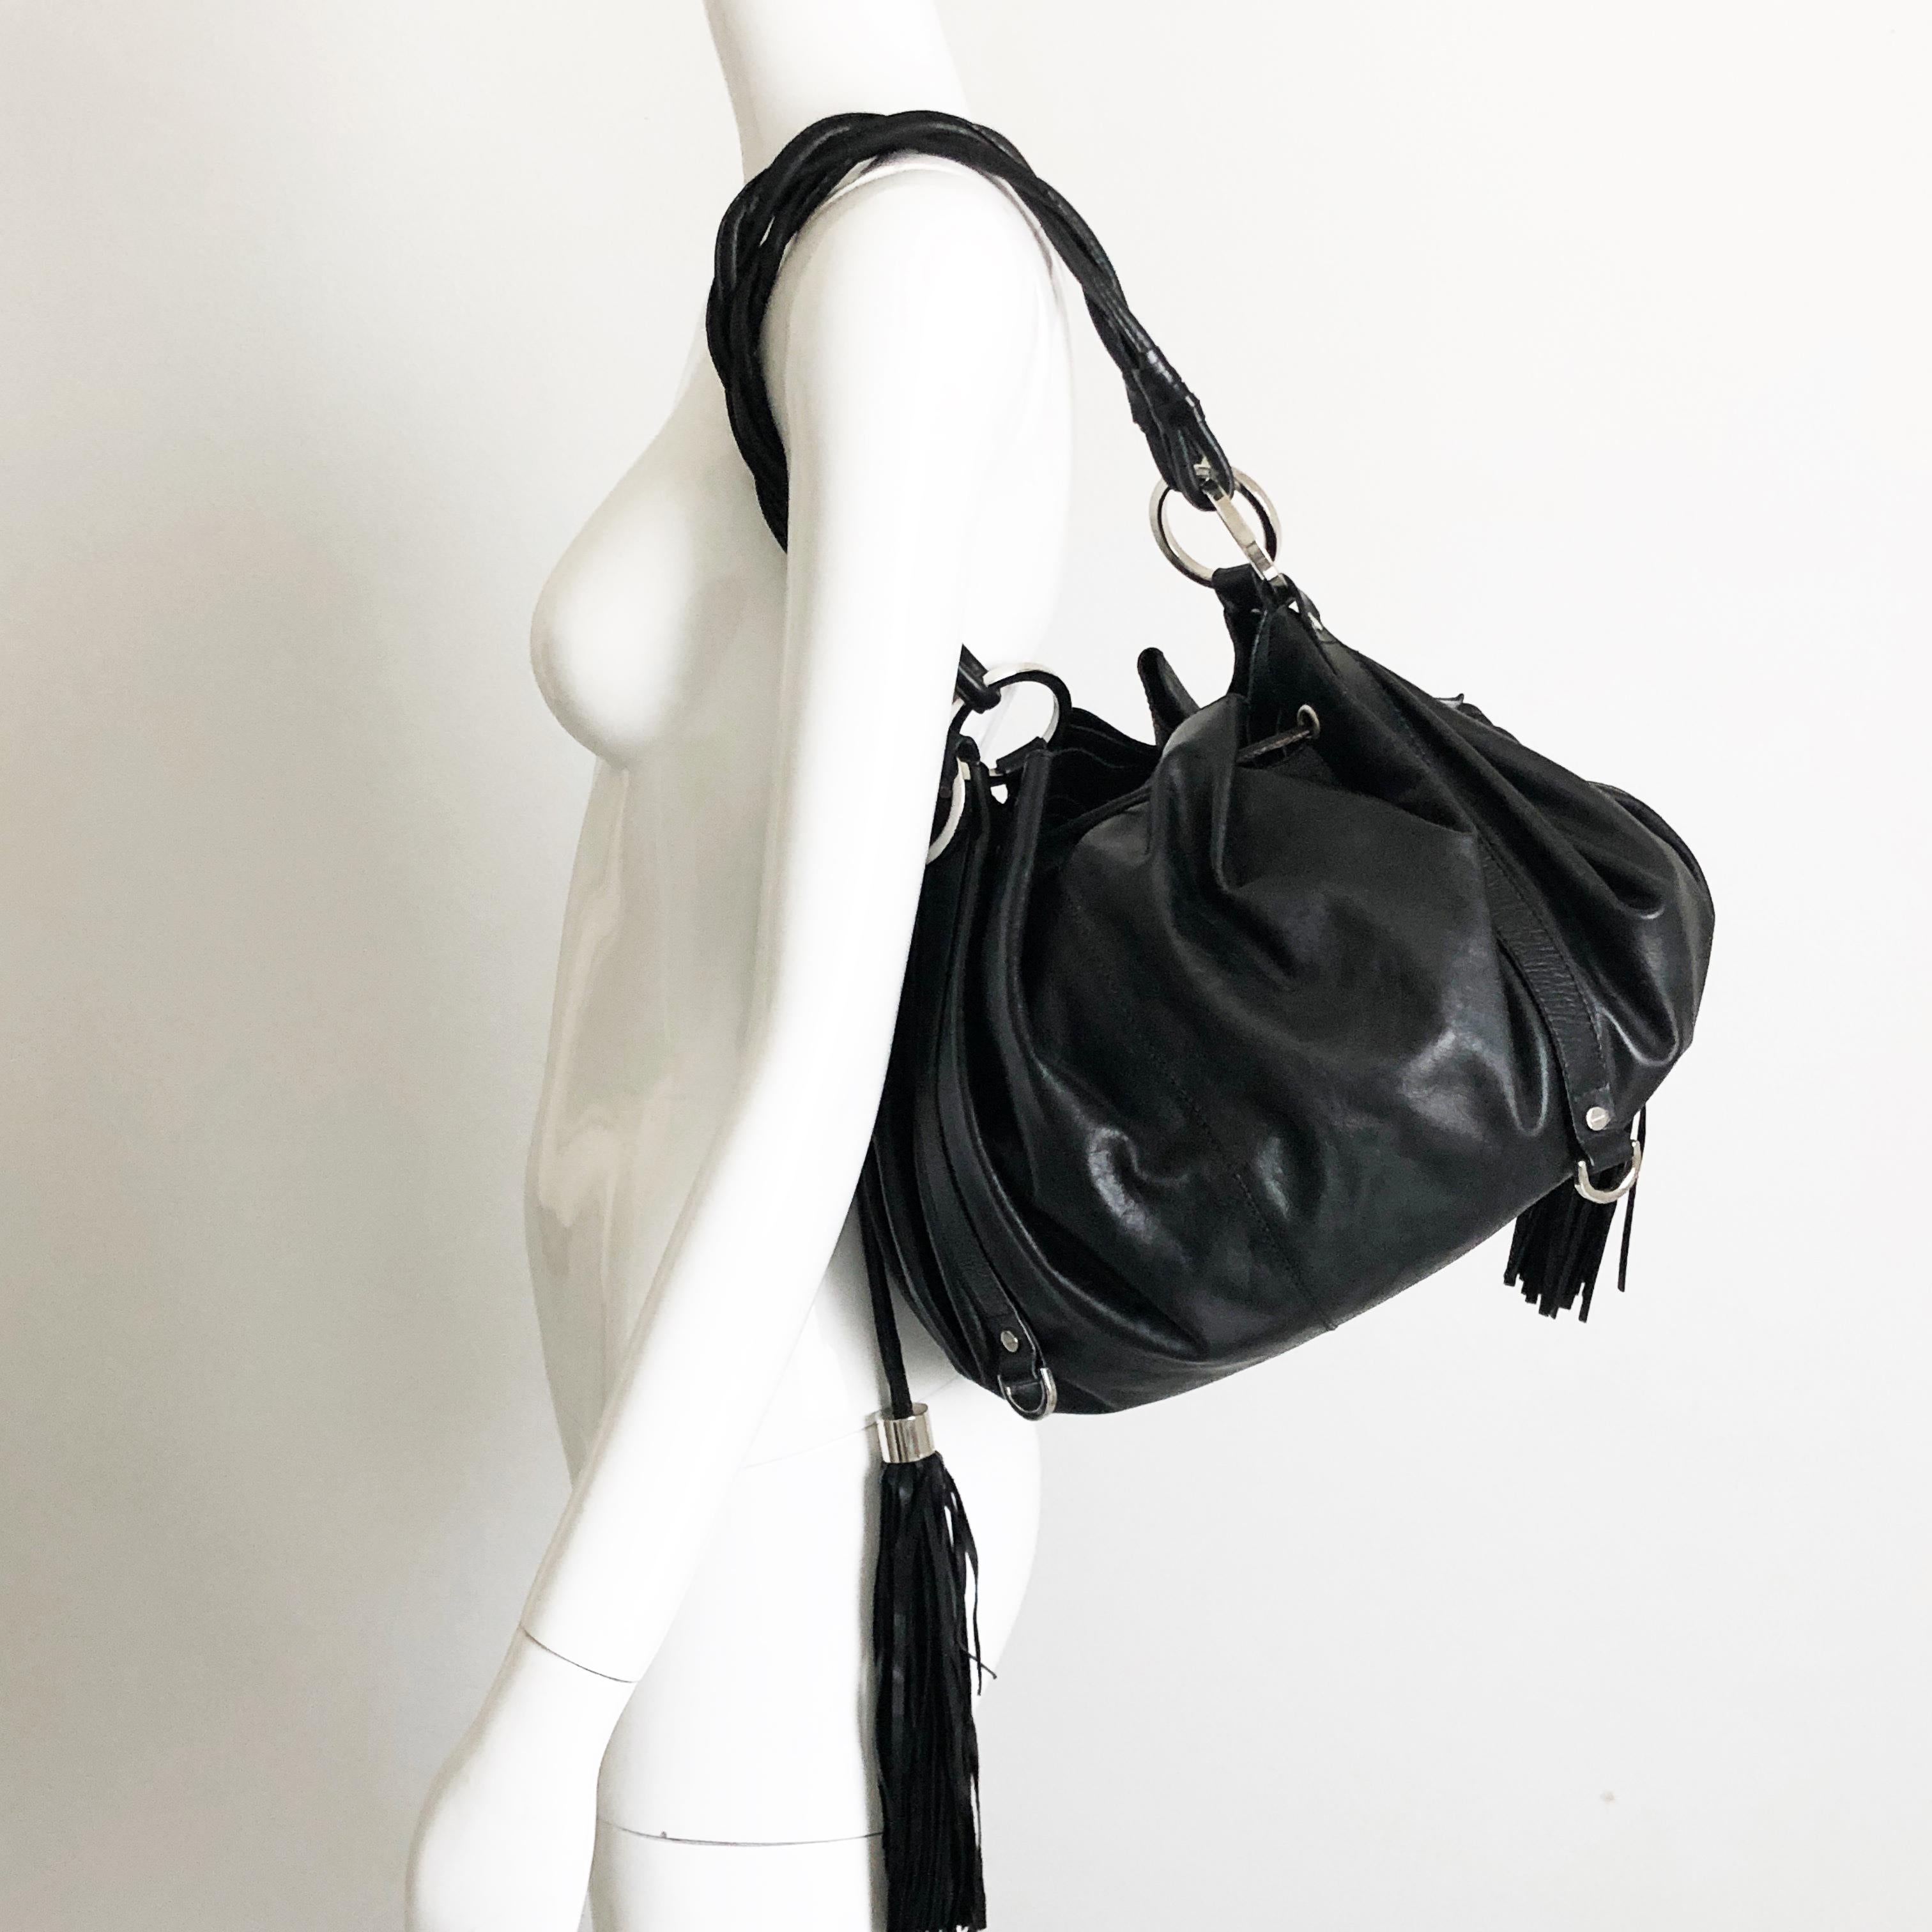 Authentic, preowned Givenchy black leather pumpkin tote or hobo bag, from mid 2000s. Silver hardware/unlined interior w/one attached leather pouch/drawstring closure with tassels. Classic shape & style. Preowned with some signs of prior use & wear: